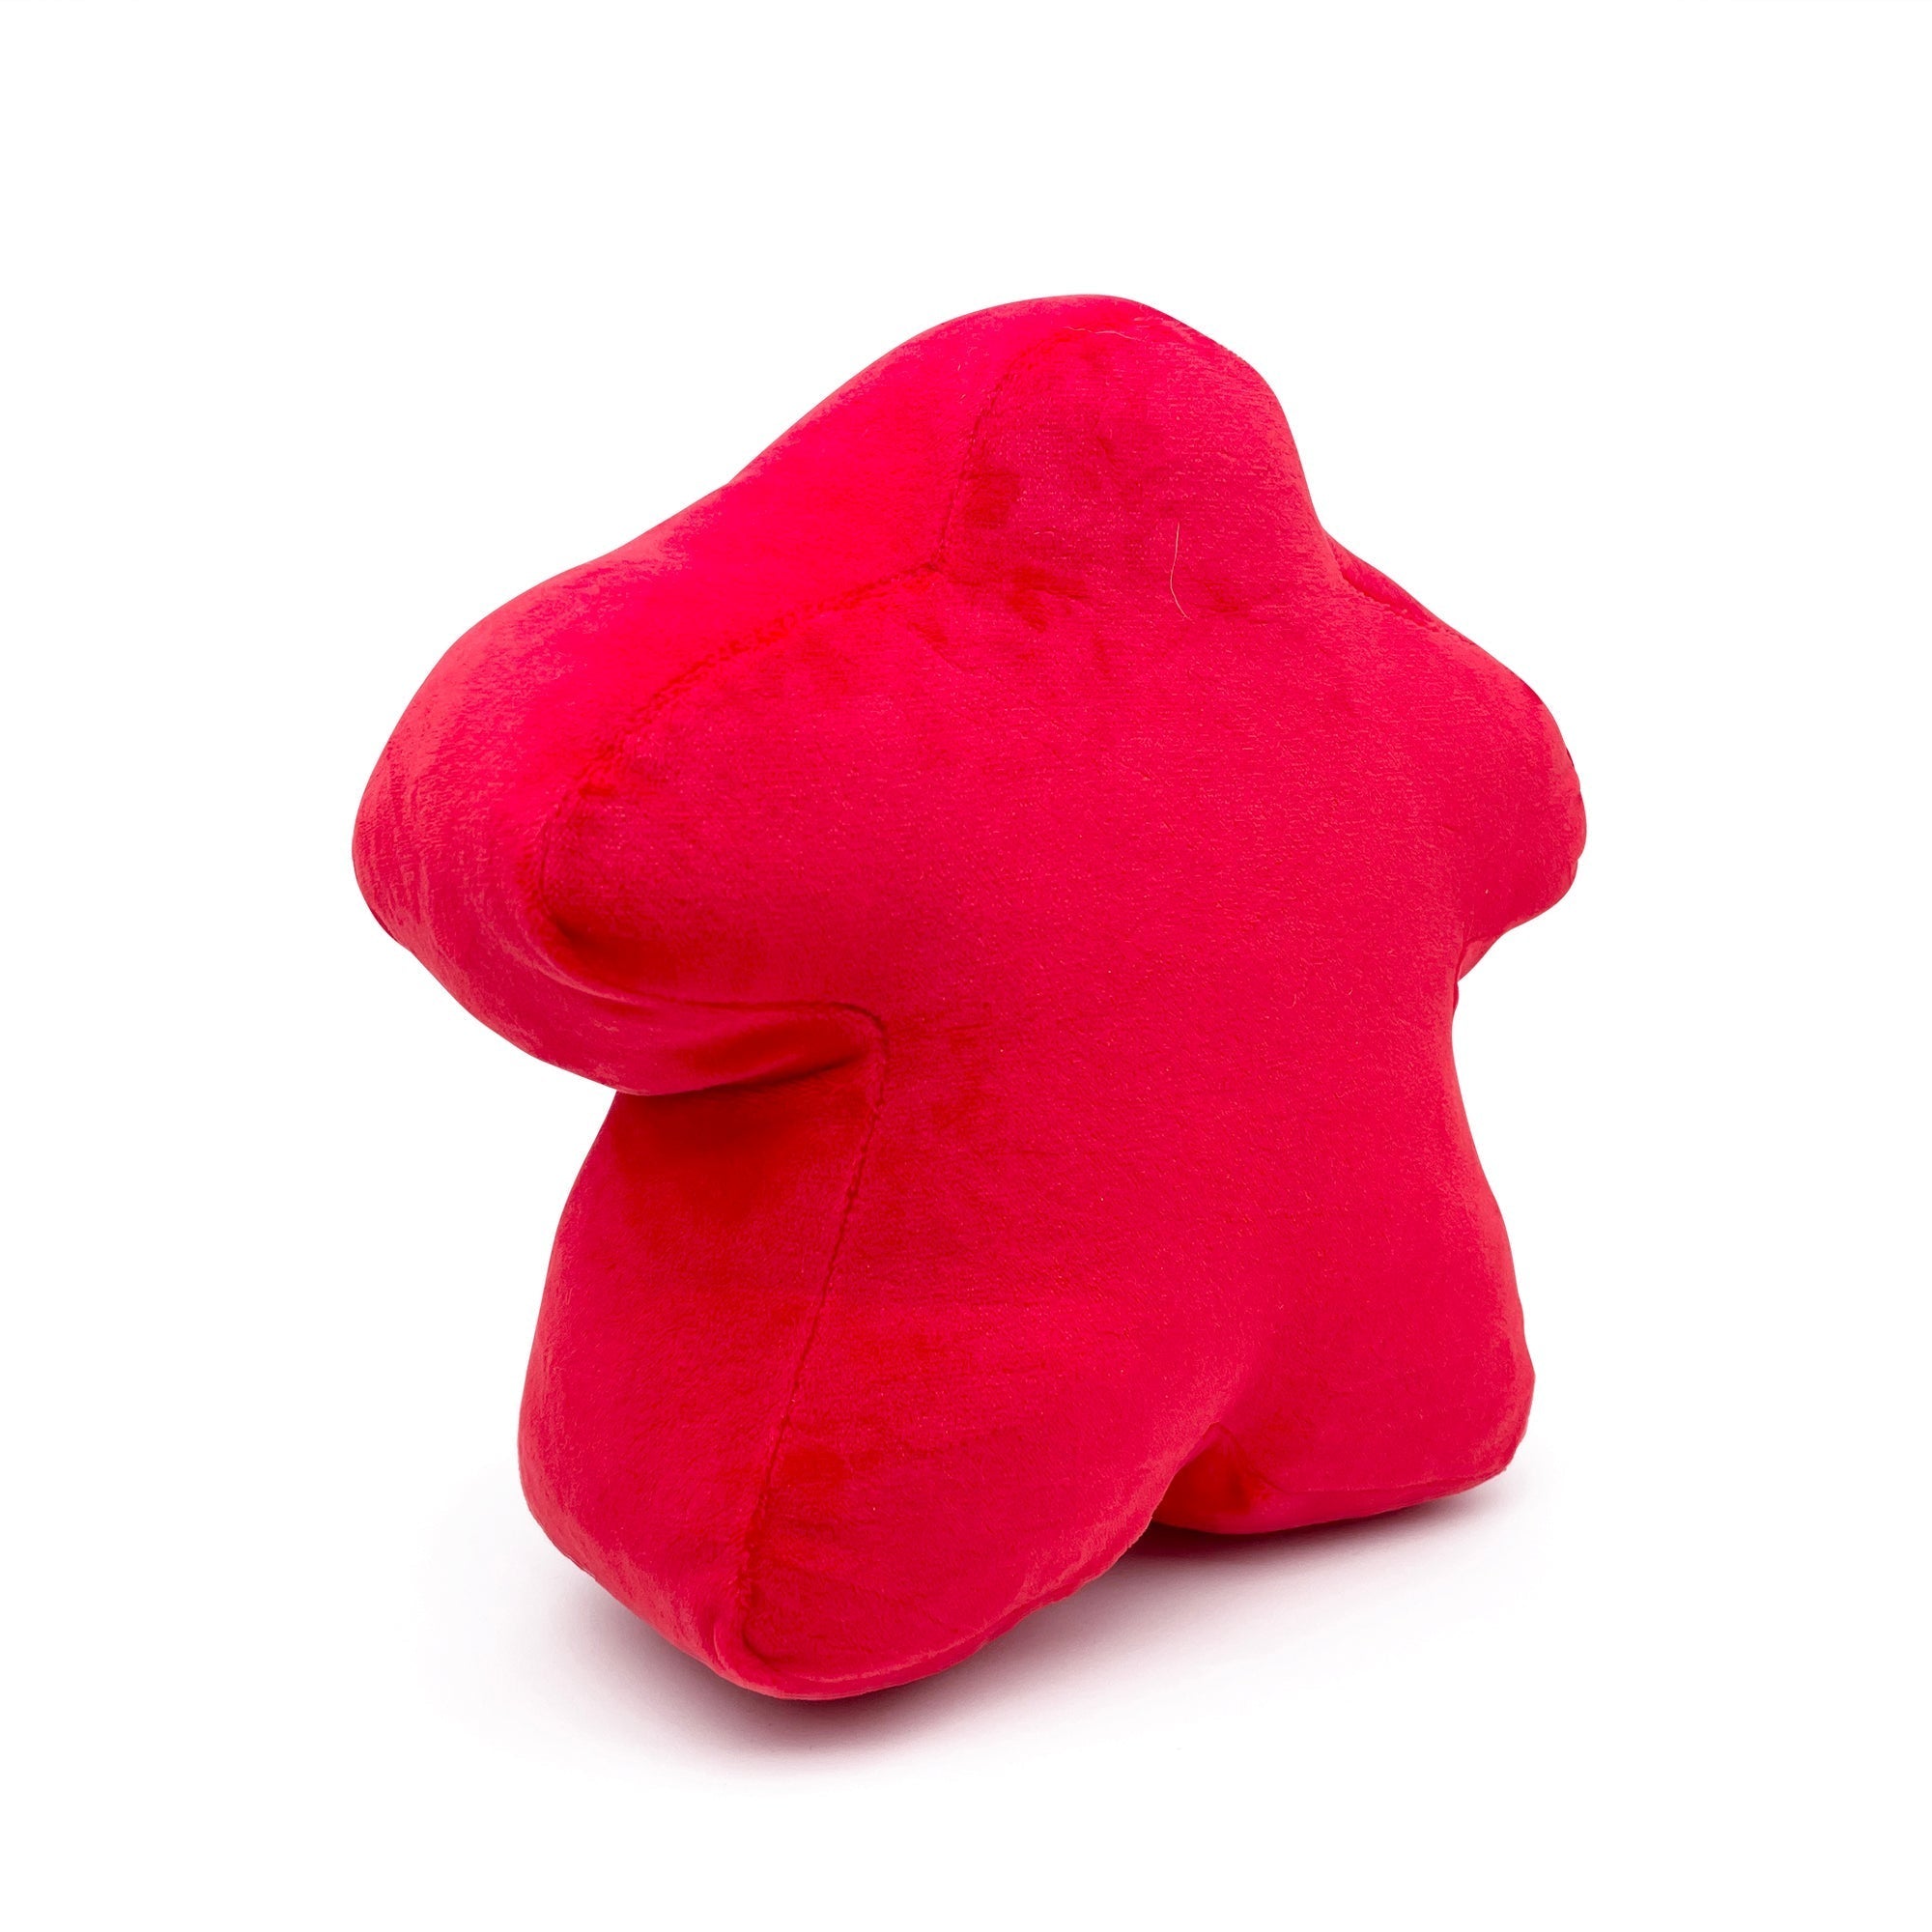 Devils Red - Red Plushie Meeple 170mm Soft Meeple - NOR 03105